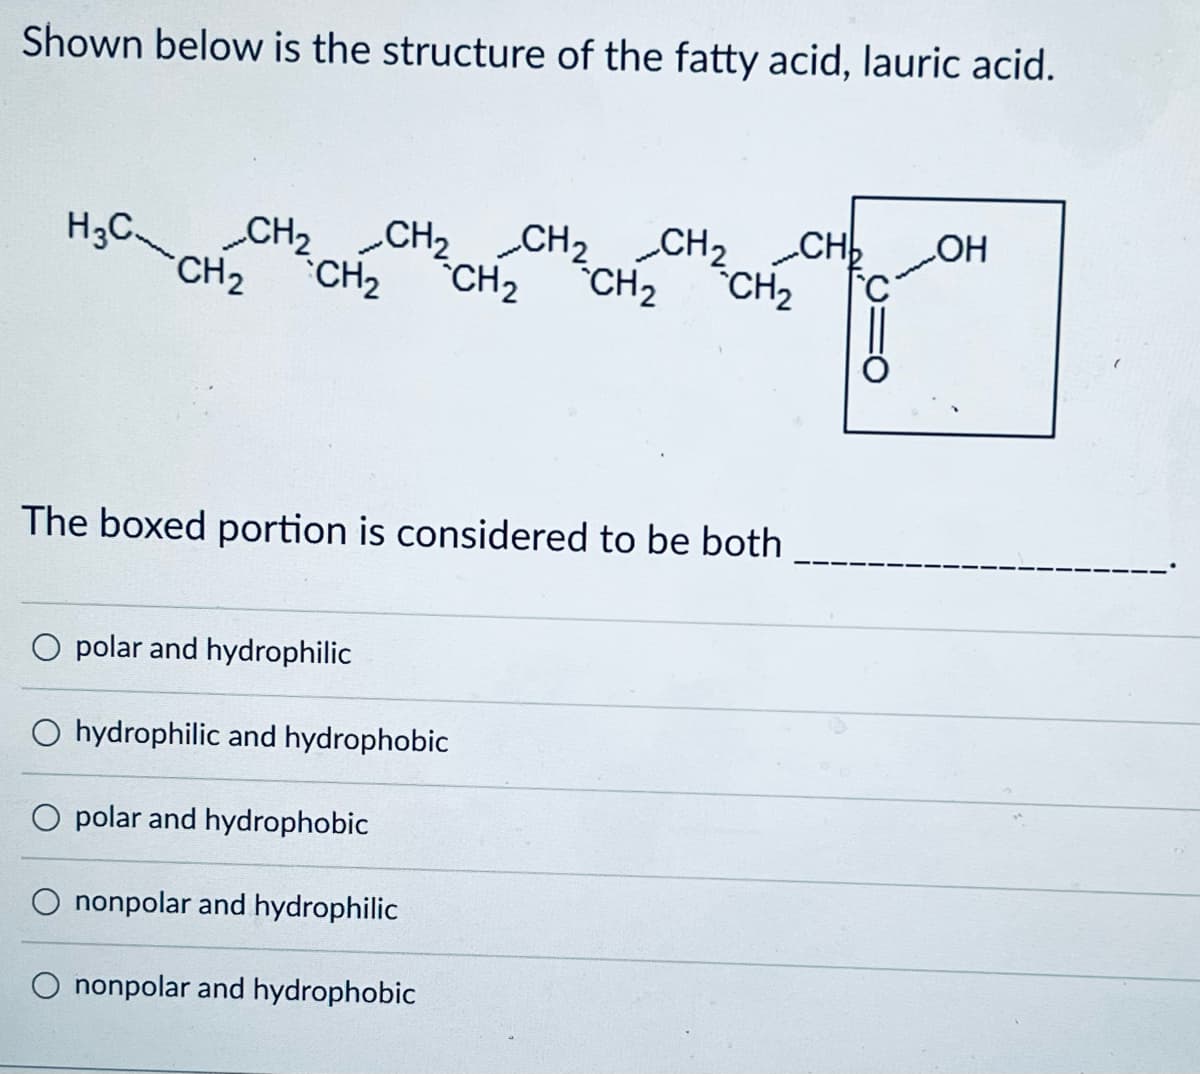 Shown below is the structure of the fatty acid, lauric acid.
H3C CH₂
_CH 2
CH2 CH2 CH 2 CH₂
CH2 CH₂ CH2
OH
CH₂
C
The boxed portion is considered to be both
Opolar and hydrophilic
Ohydrophilic and hydrophobic
Opolar and hydrophobic
nonpolar and hydrophilic
nonpolar and hydrophobic